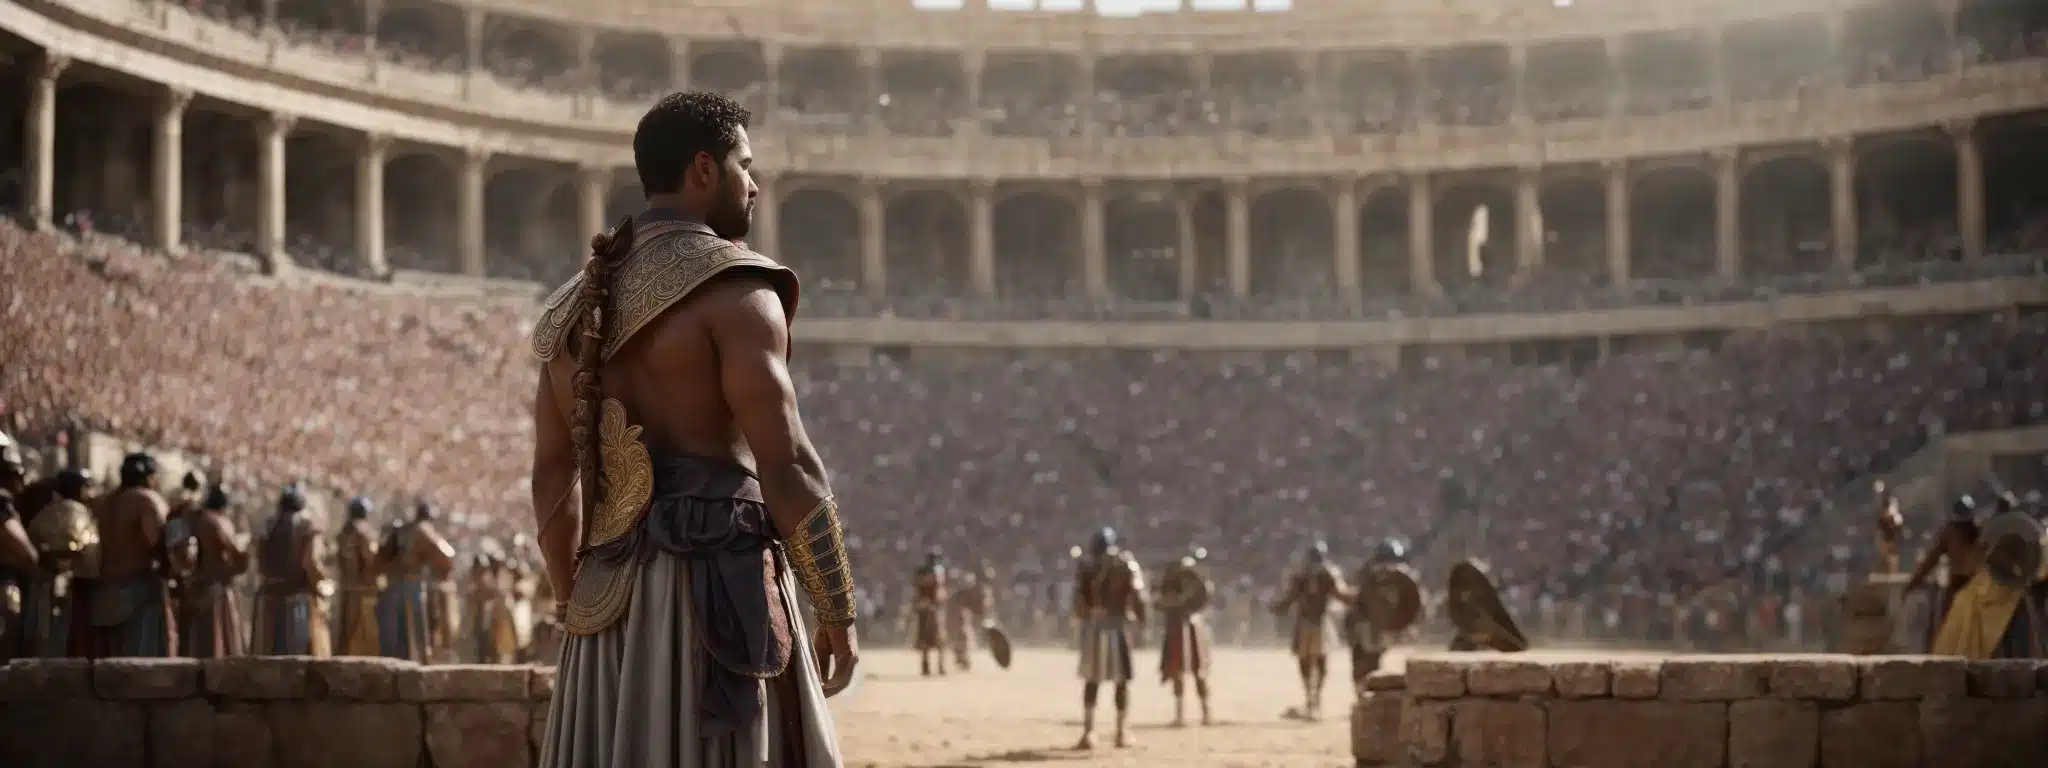 A Gladiator Stands Triumphant, Embodying Harmony In A Coliseum, As Captivated Spectators Symbolize Active User Engagement.